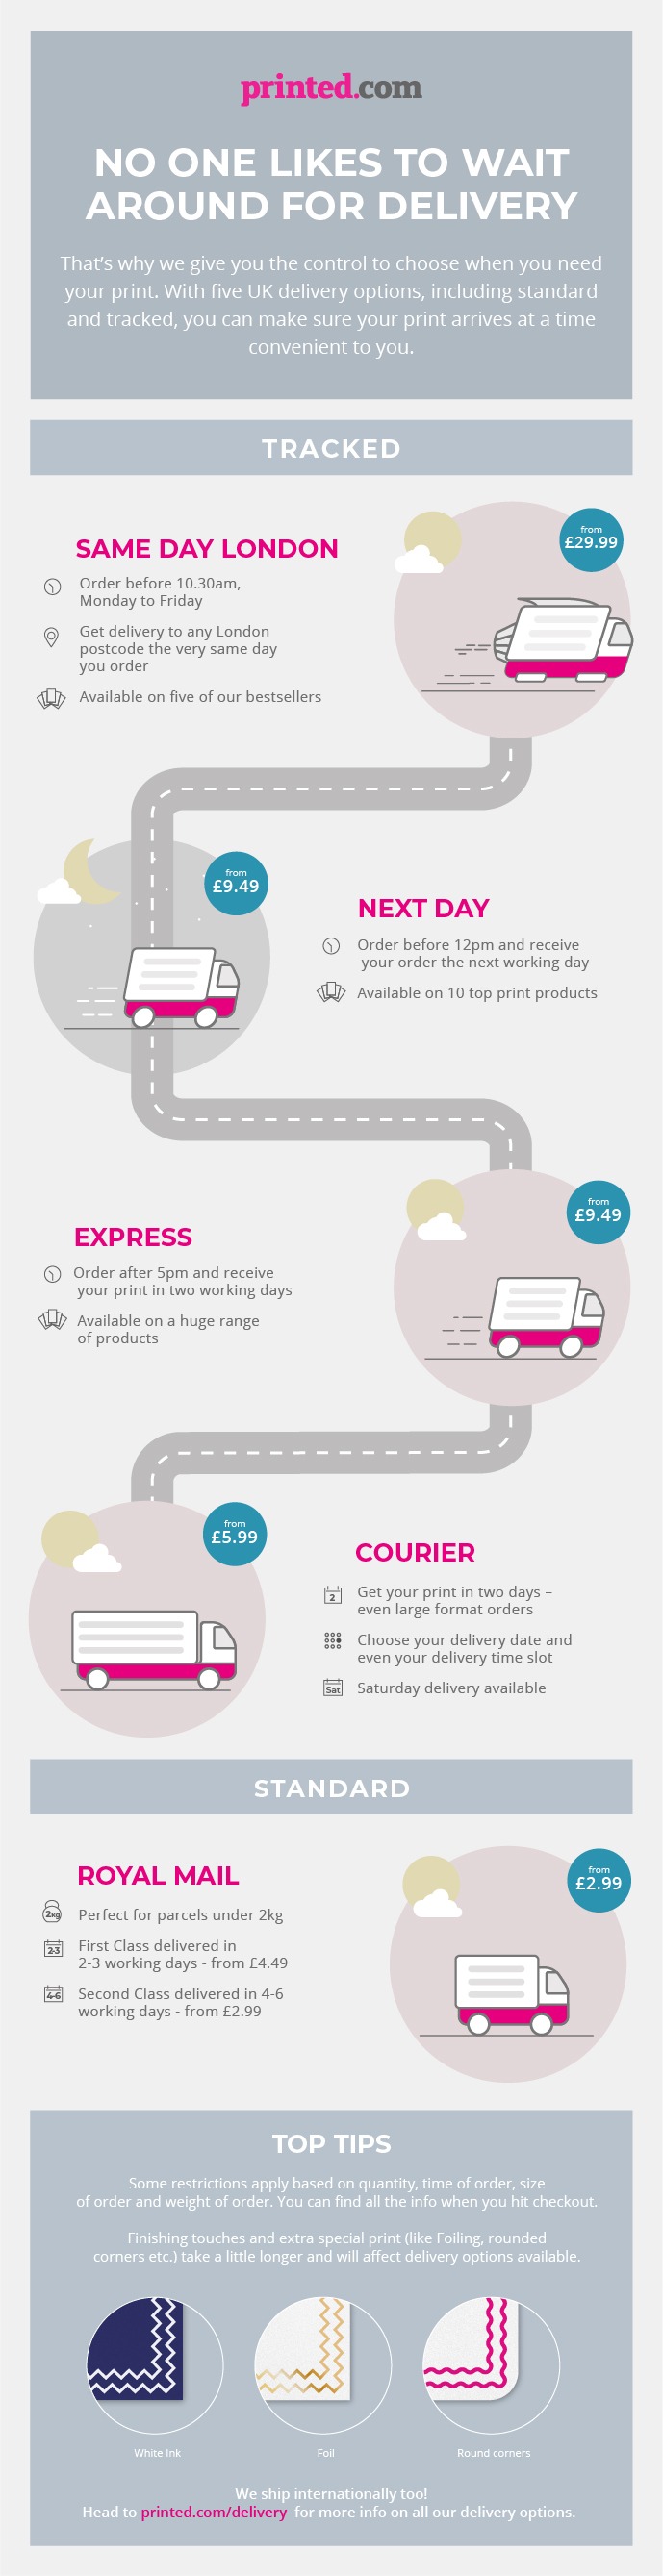 Infographic, delivery options at printed.com from 2.99